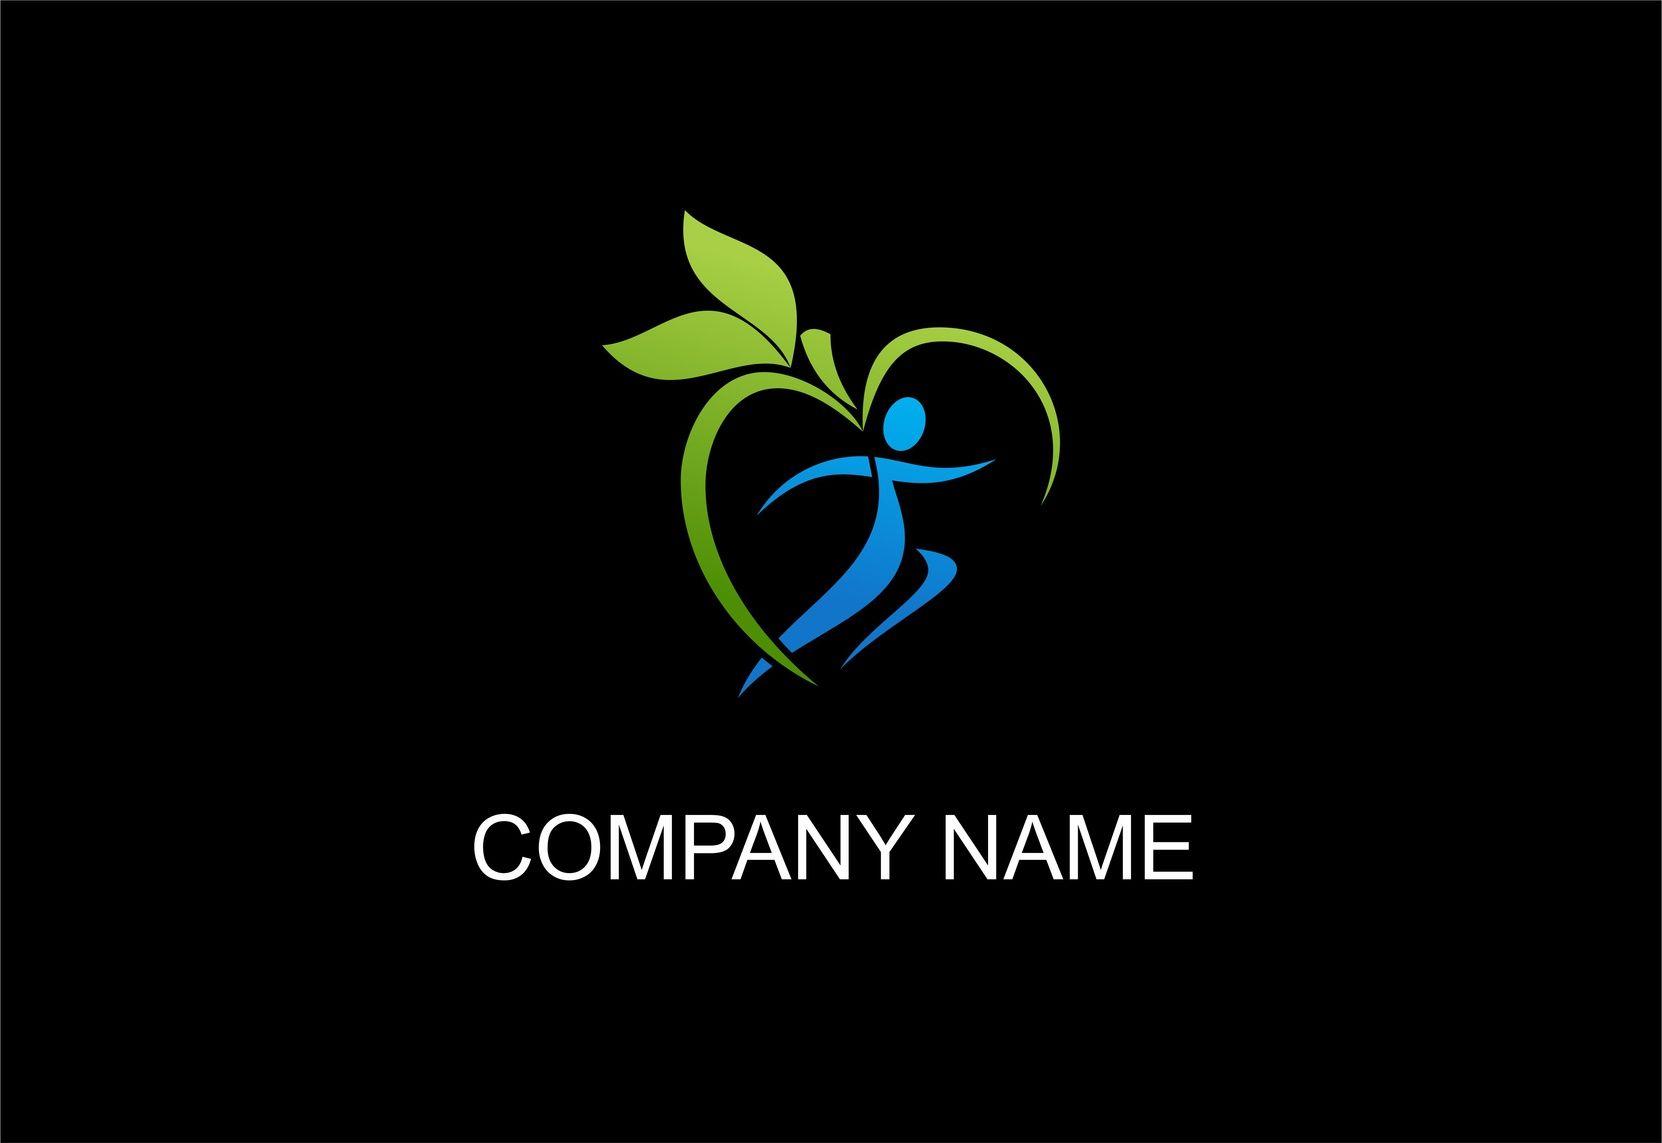 Nutritionist Logo - Branding Your Health Business With a Stunning Nutritionist Logo